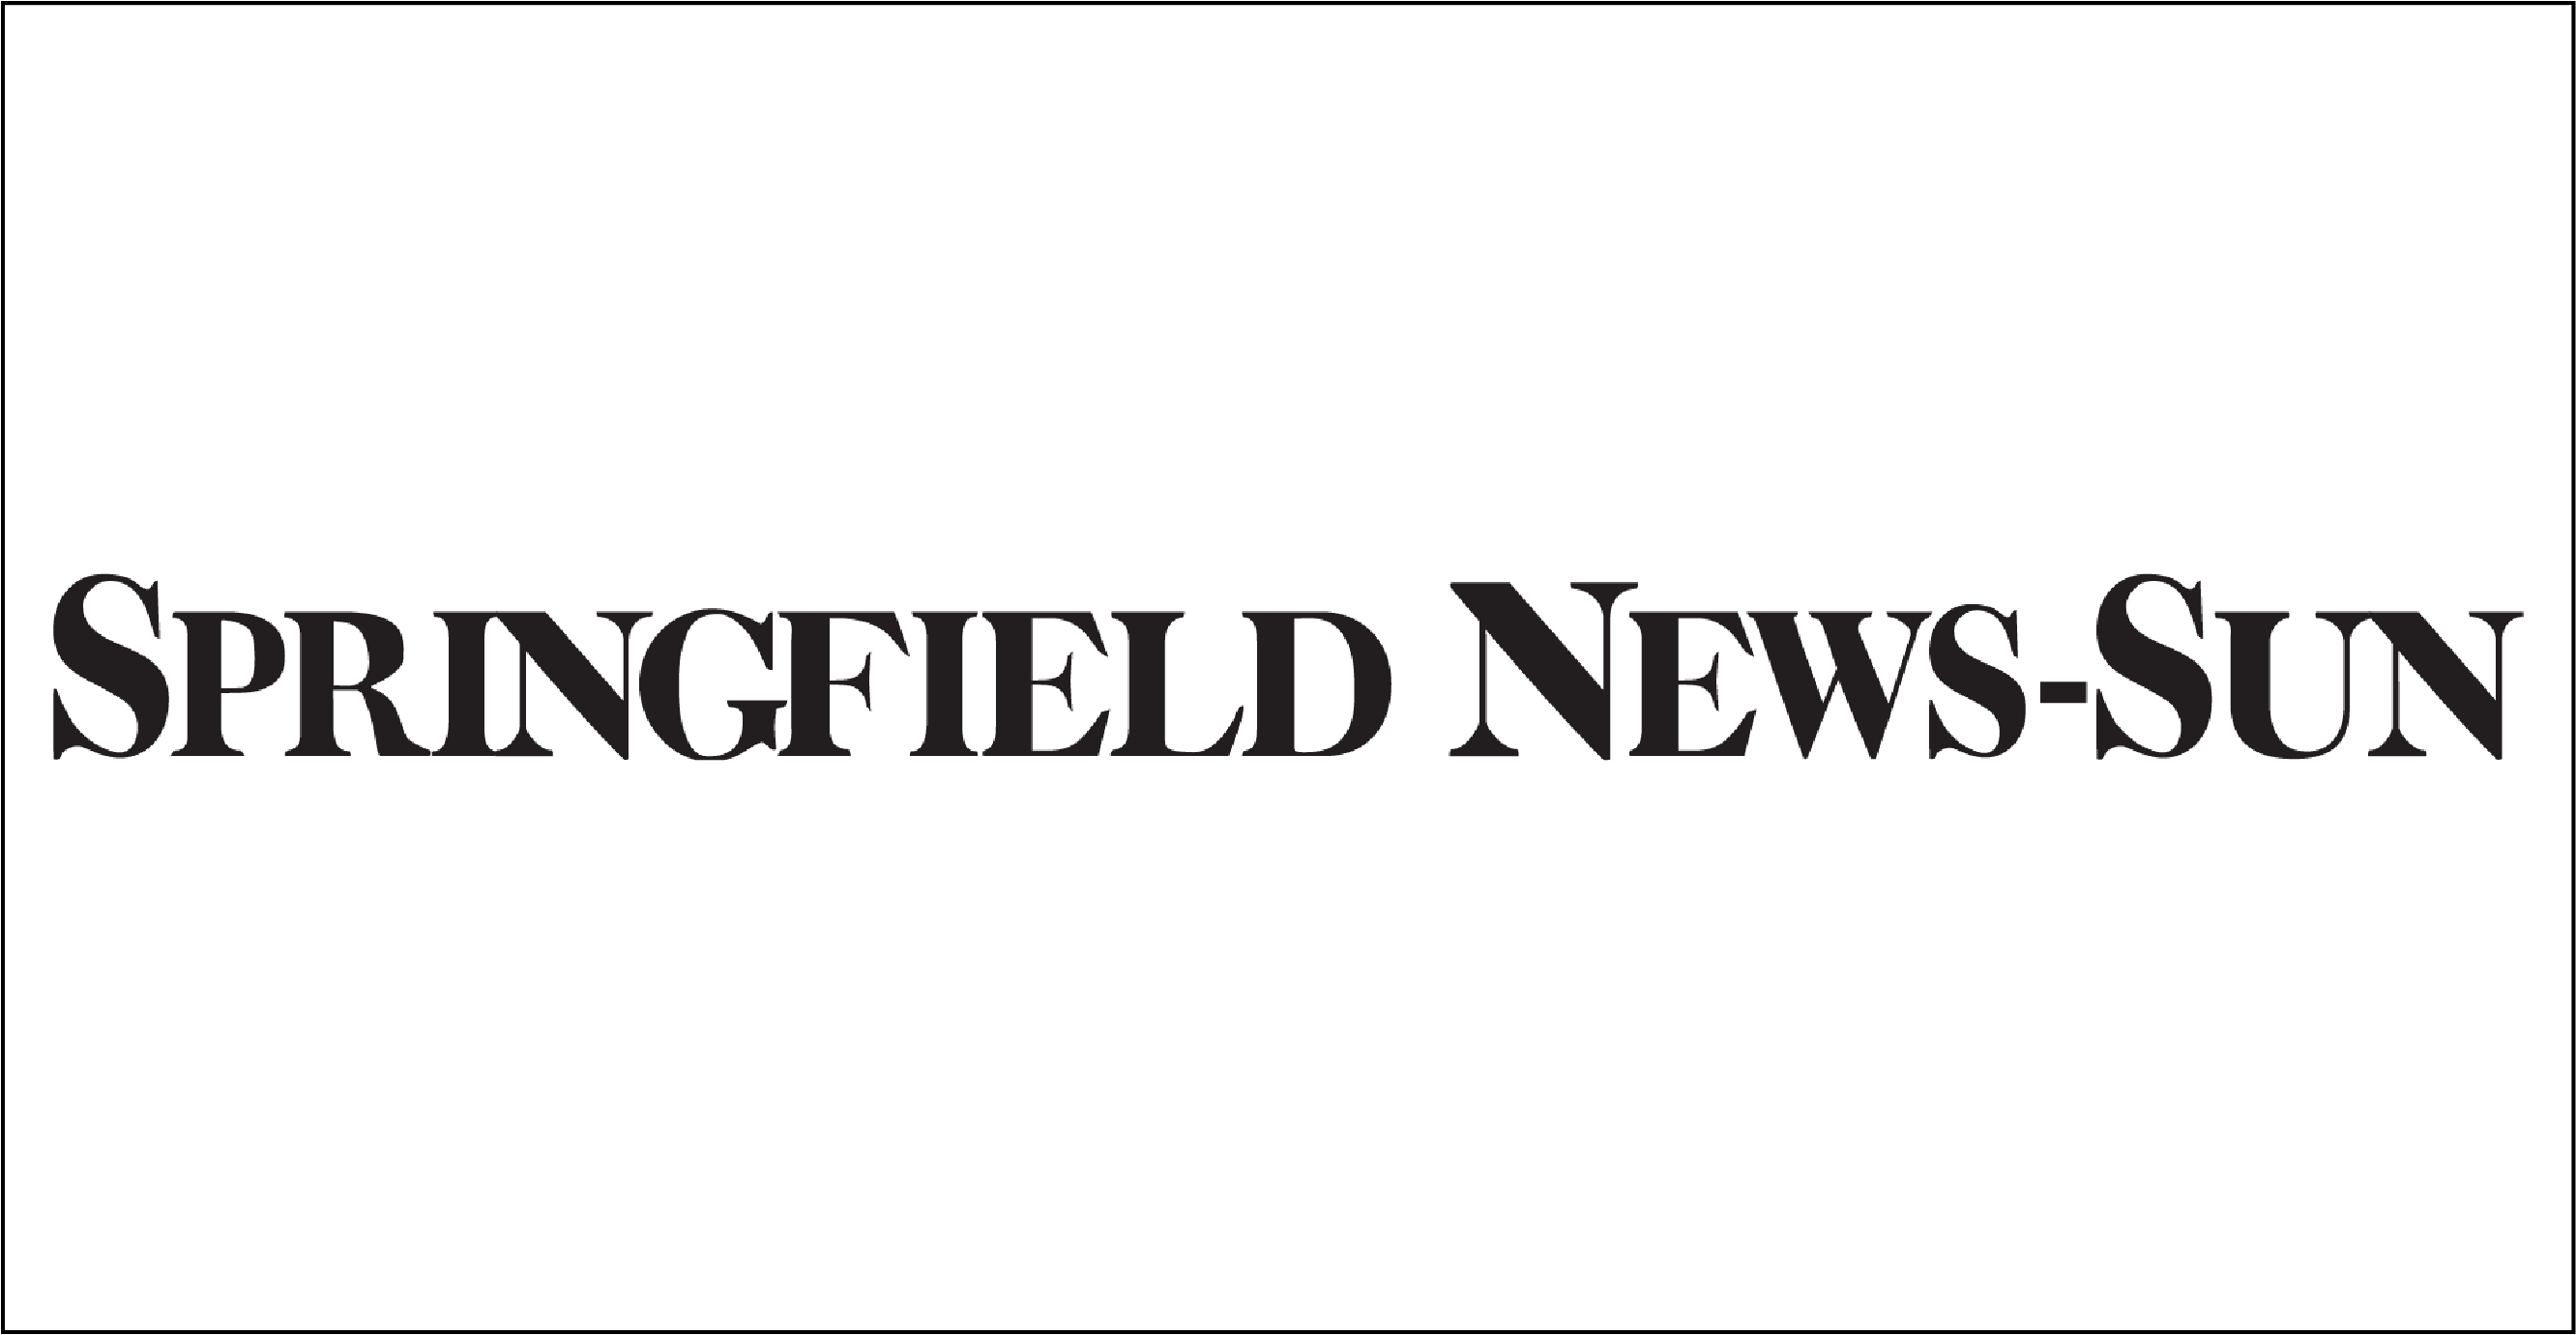 Springfield News Sun: The Best Source For Local News, Sports, Business And Entertainment.